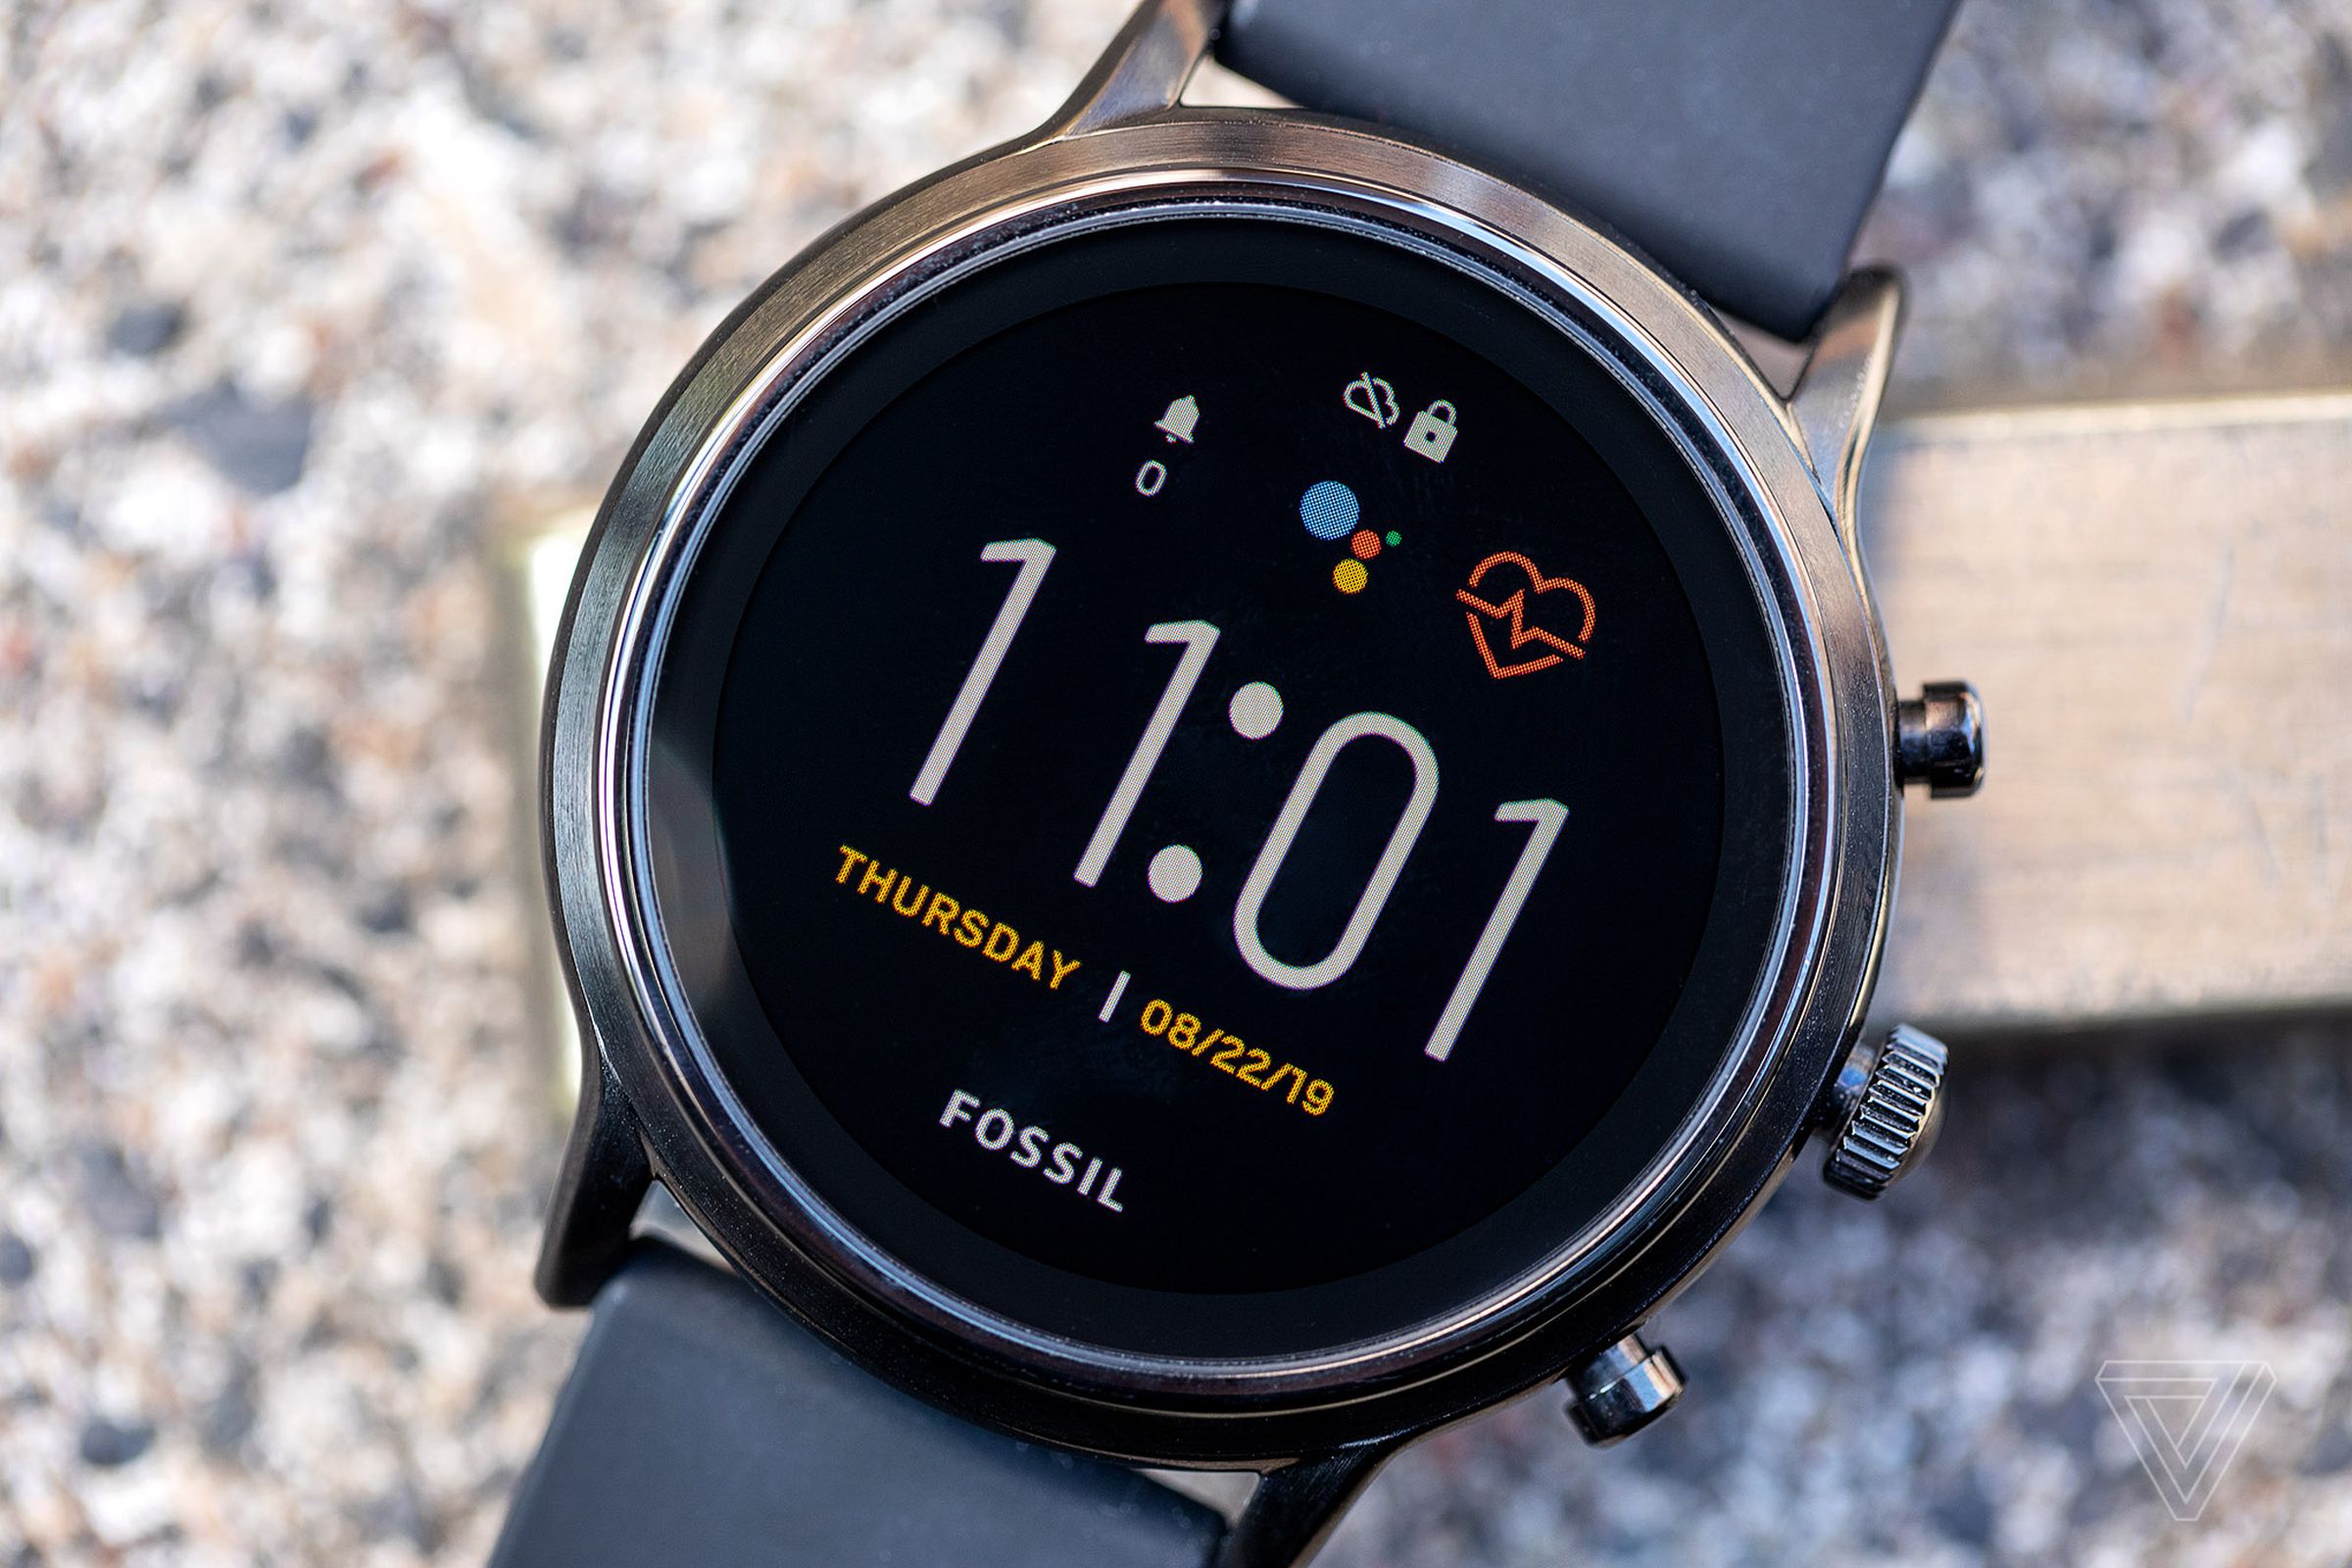 With so many announcements and releases last month, like the Fossil Gen 5, IFA 2019 could be a quiet year for wearables.